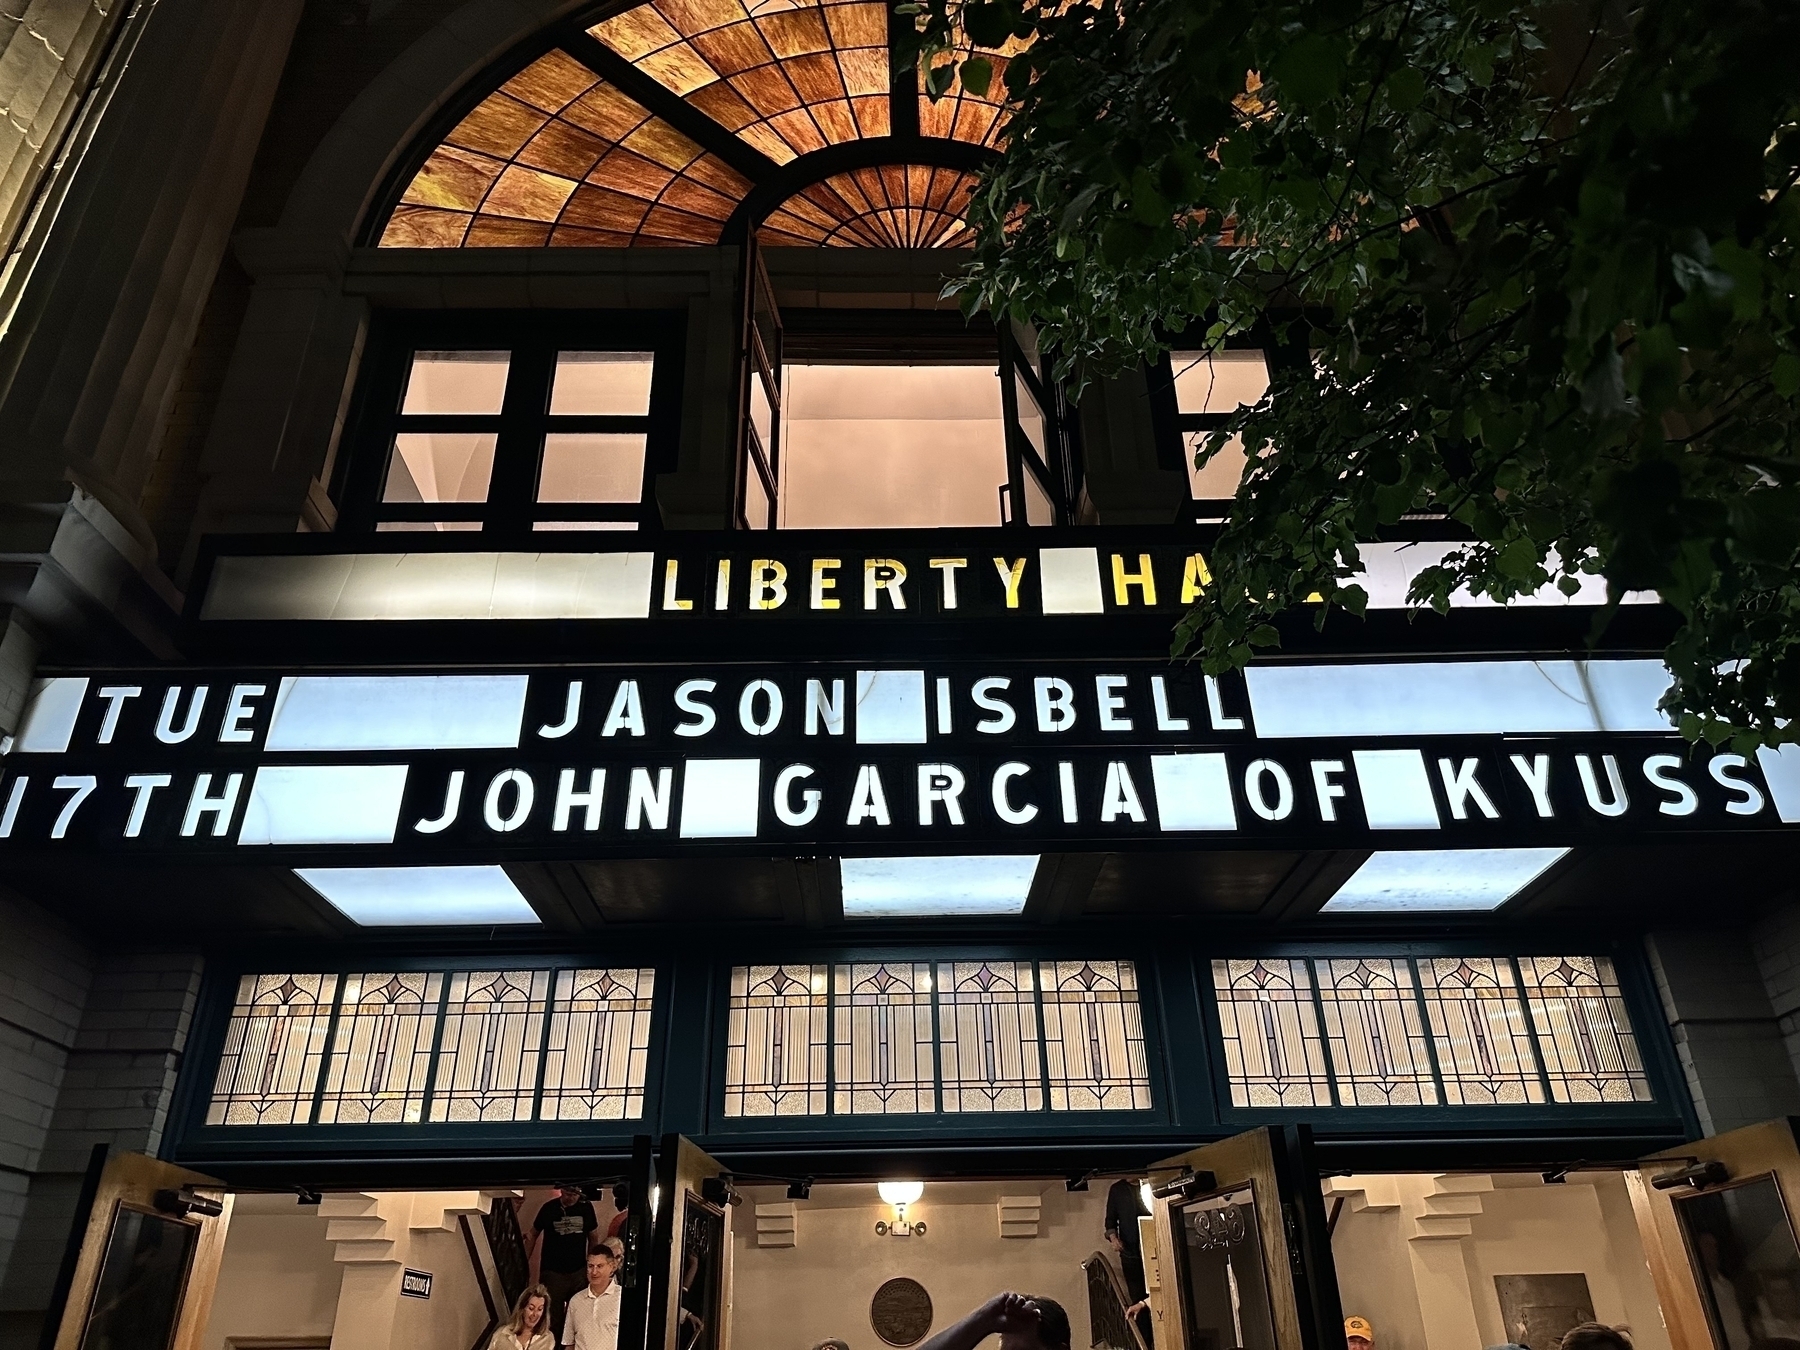 Jason Isbell's name on the Liberty Hall Marquee